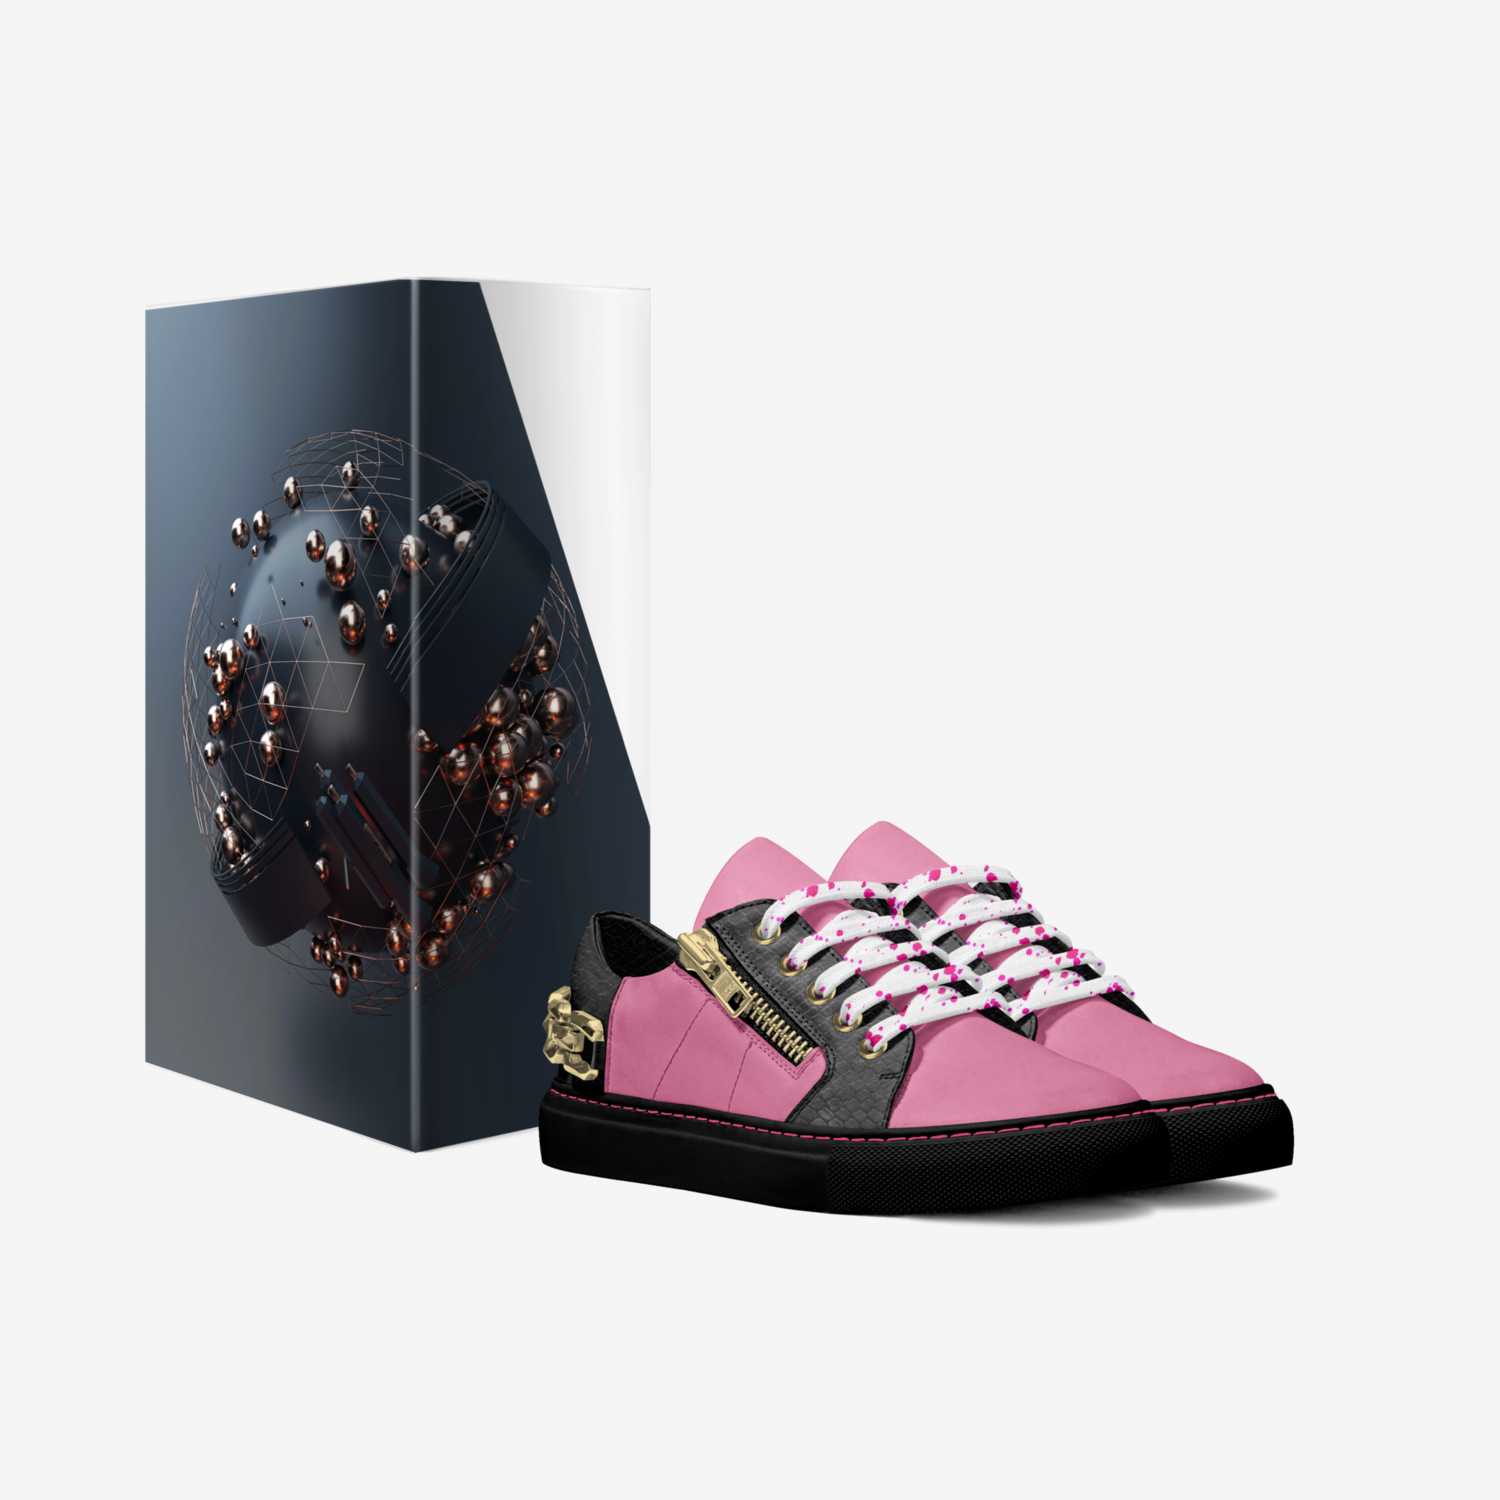 Hanami custom made in Italy shoes by Eon Duzant | Box view